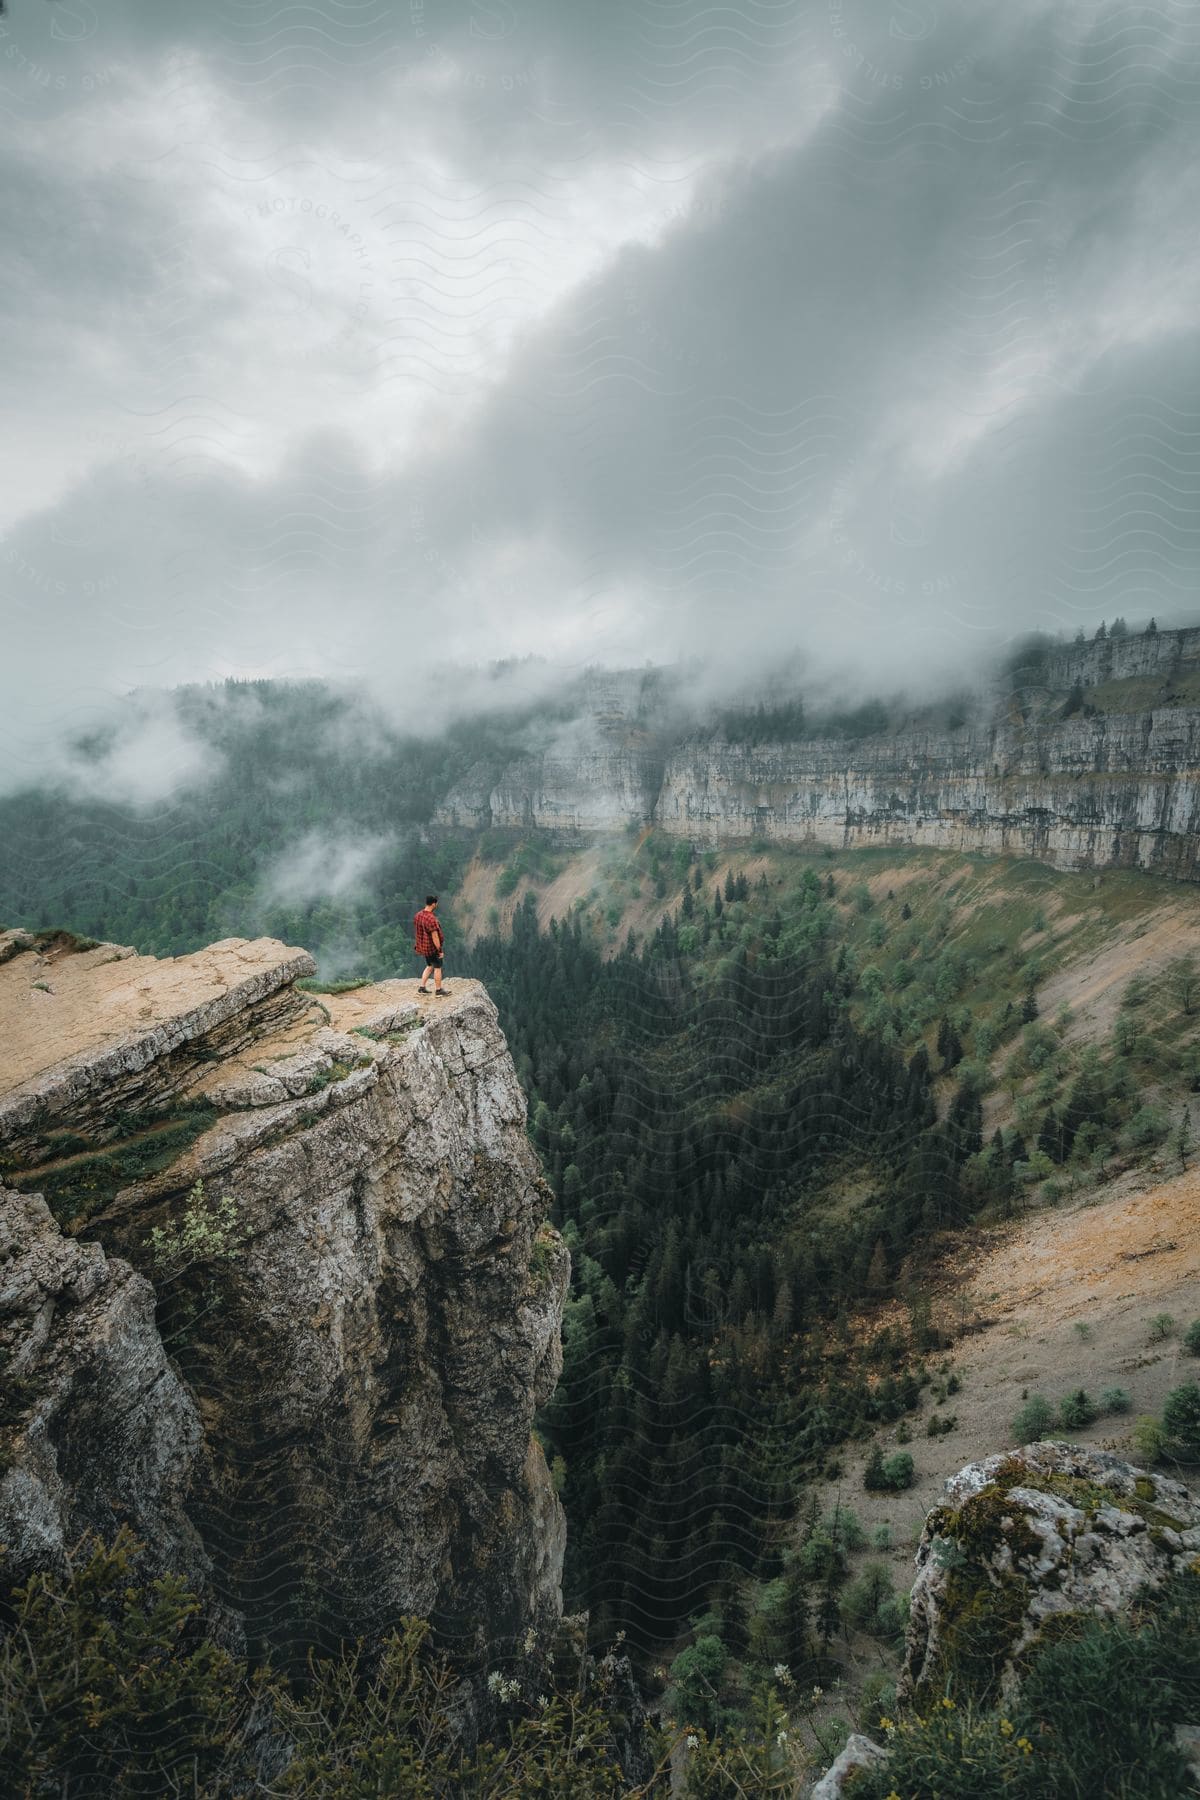 A hiker stands on the edge of a cliff overlooking a forested valley.